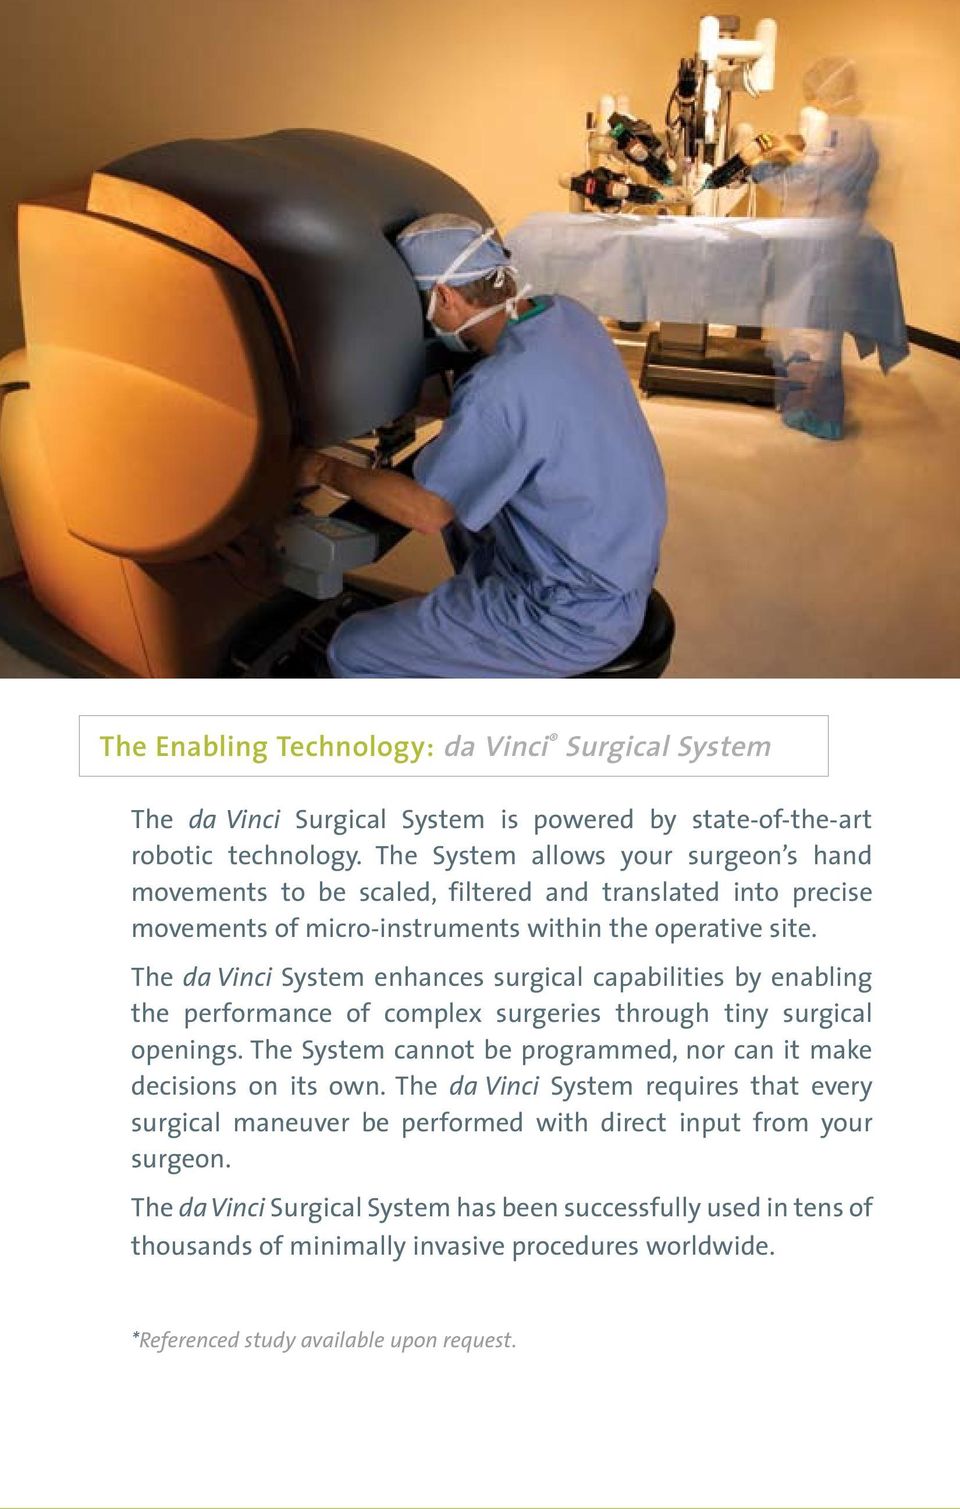 The da Vinci System enhances surgical capabilities by enabling the performance of complex surgeries through tiny surgical openings.